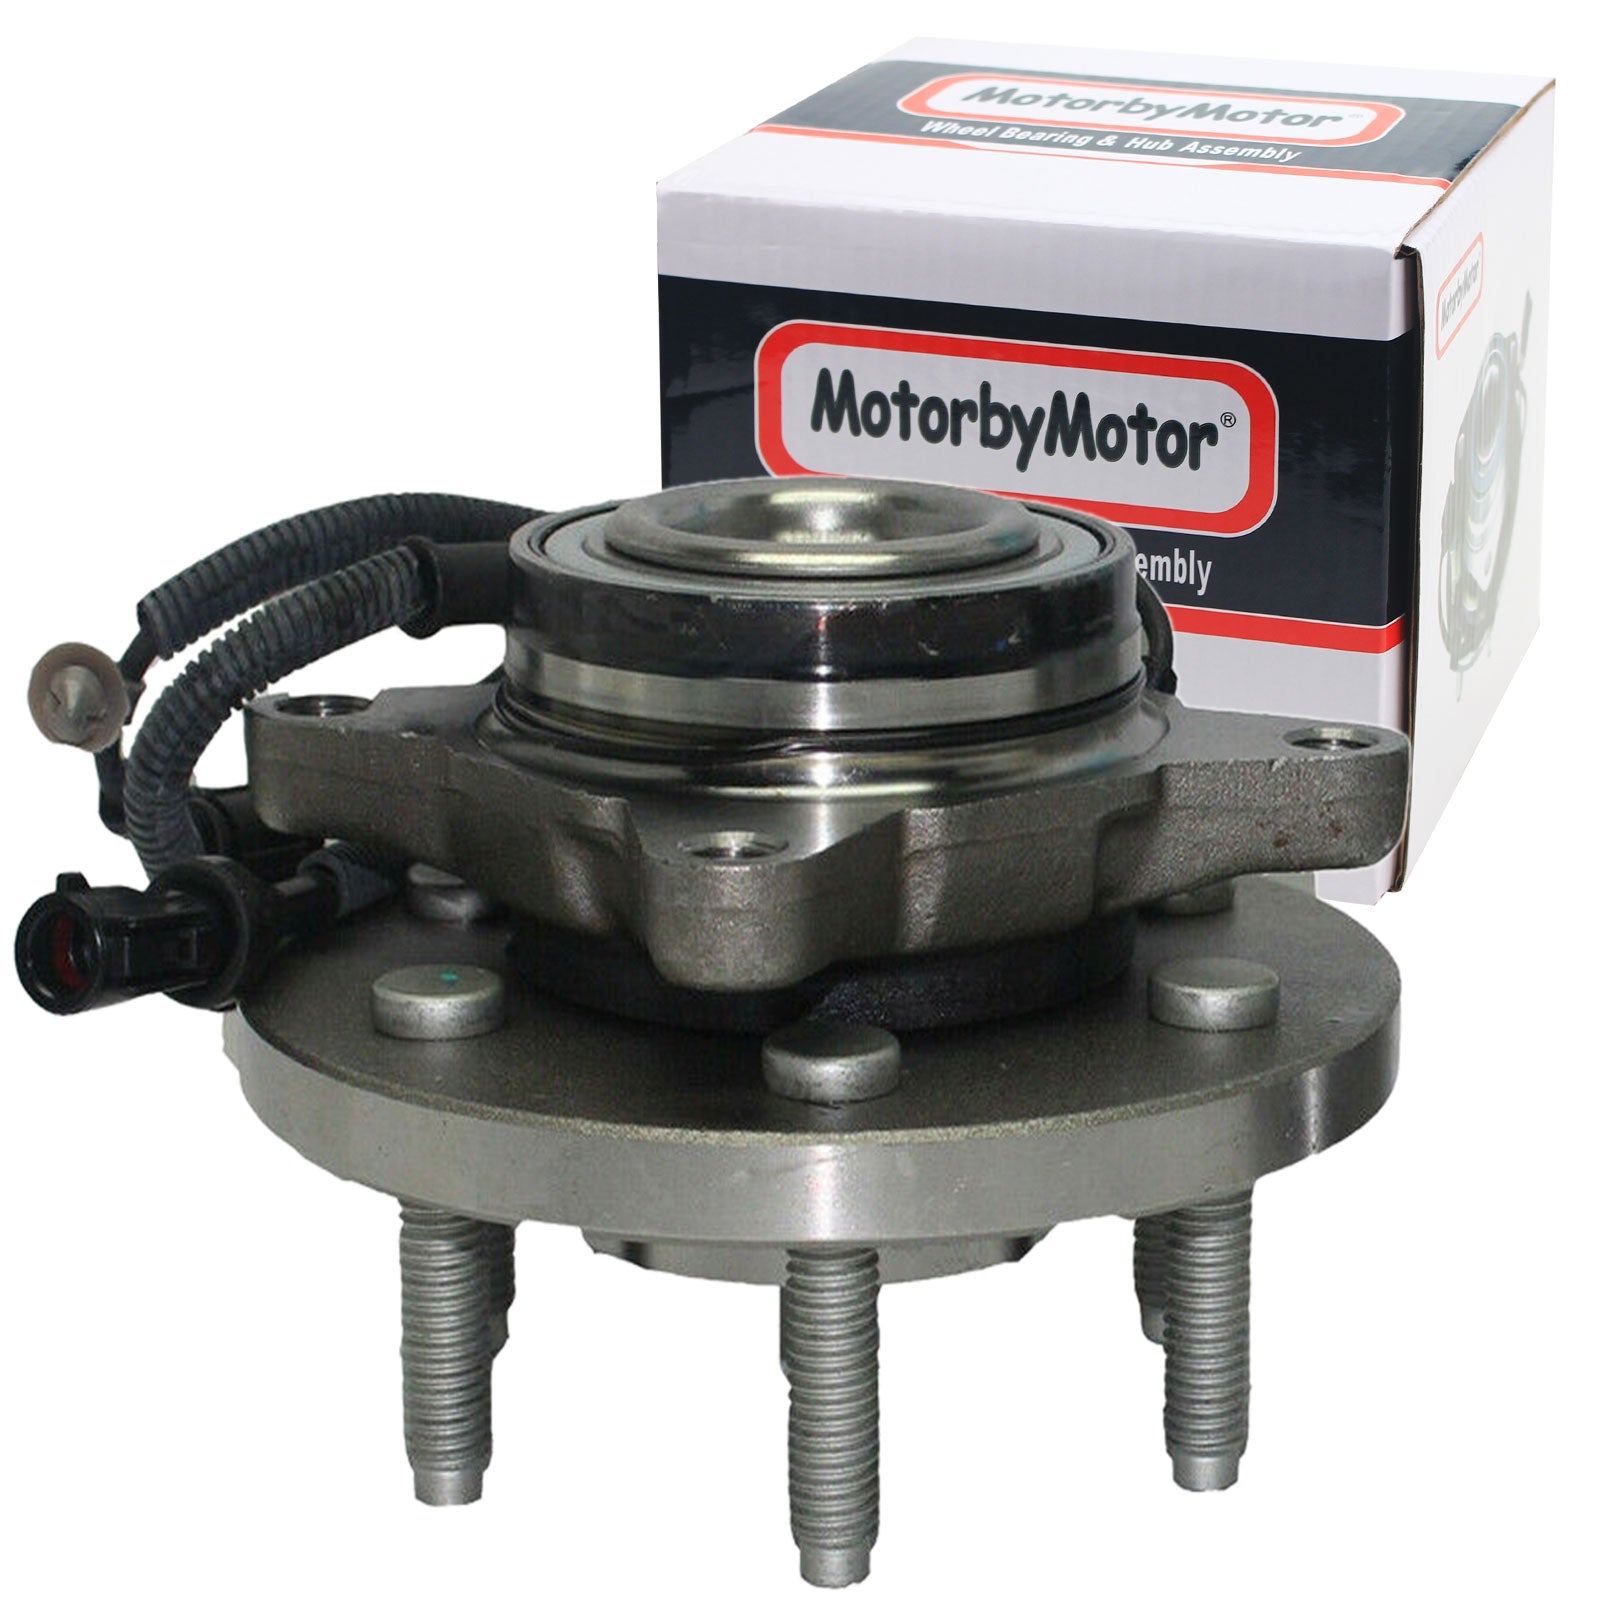 MotorbyMotor 515094 Front Wheel Bearing and Hub Assembly with 6 Lugs fits for Ford Expedition Lincoln Navigator Low-Runout OE Directly Replacement Hub Bearing w/ABS RWD MotorbyMotor